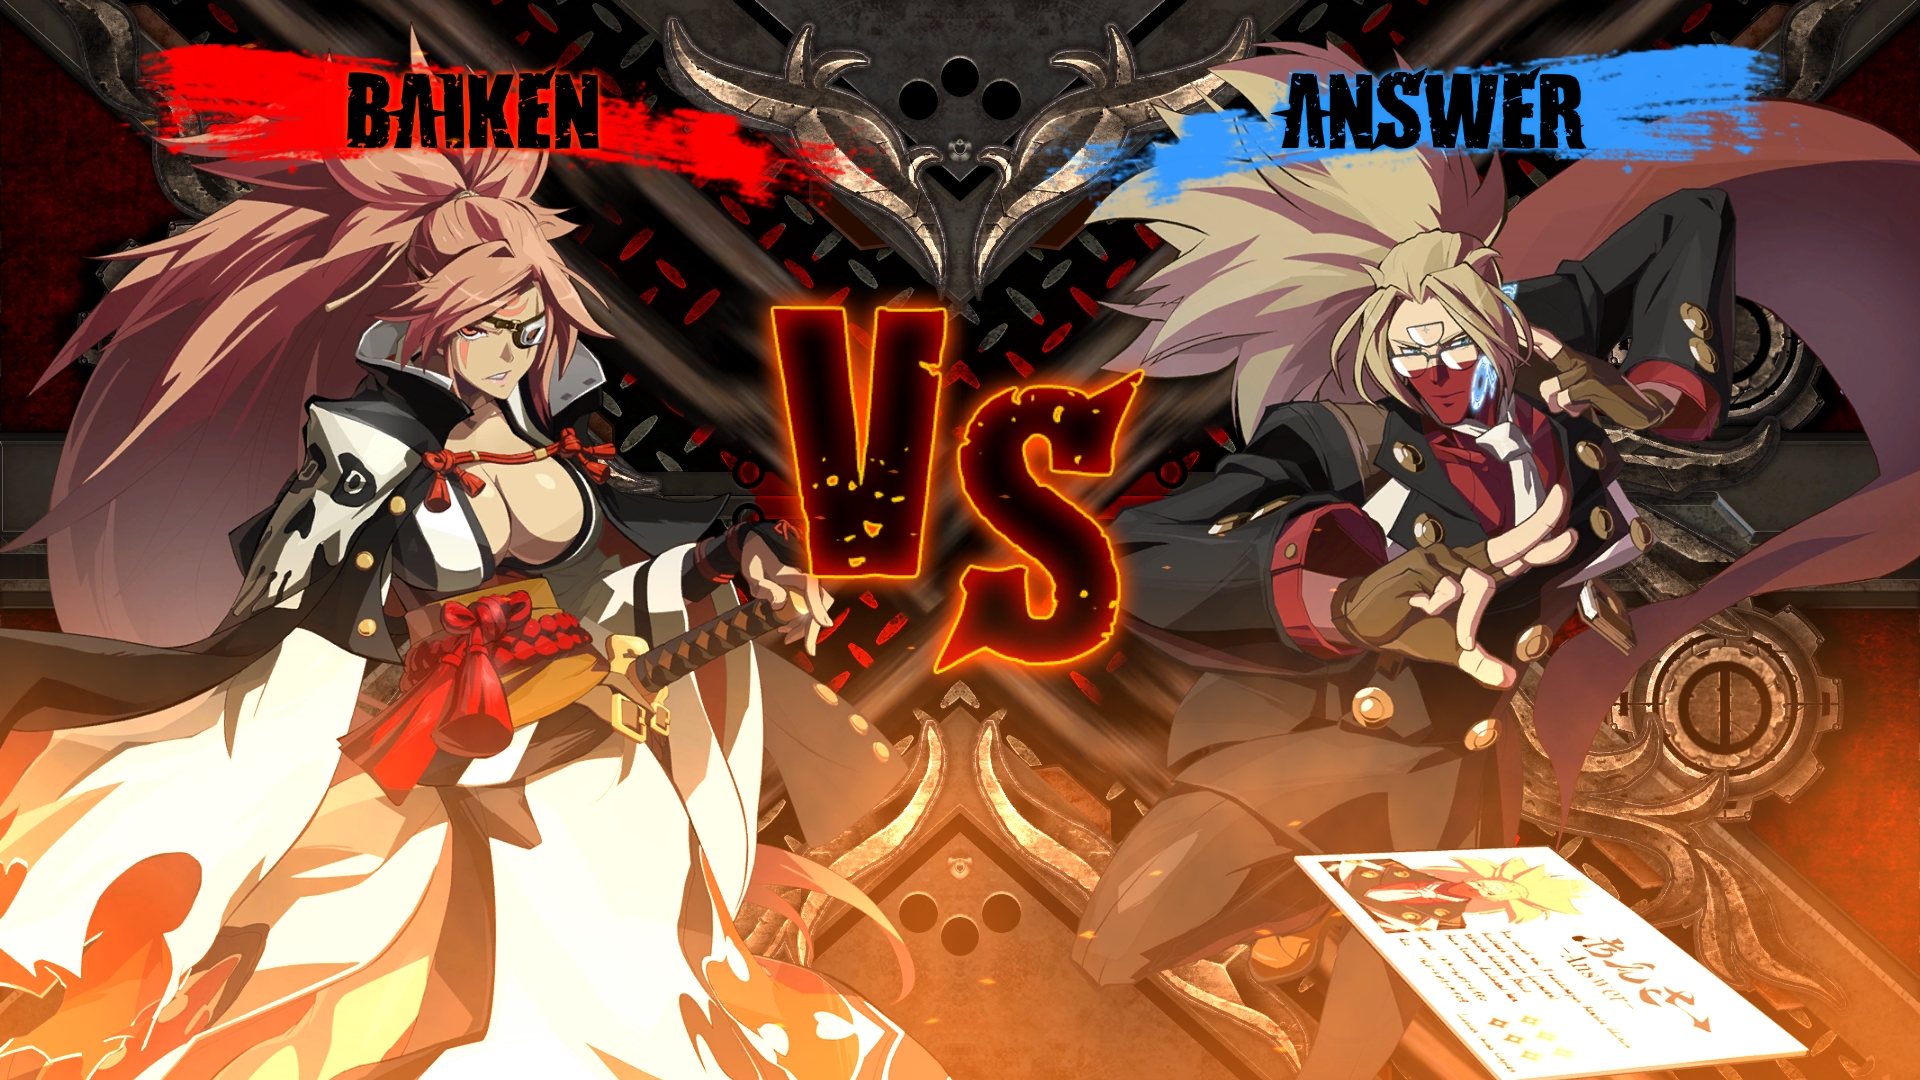 Guilty Gear Xrd Rev 2 Now Available in Japan for PS3 and PS4